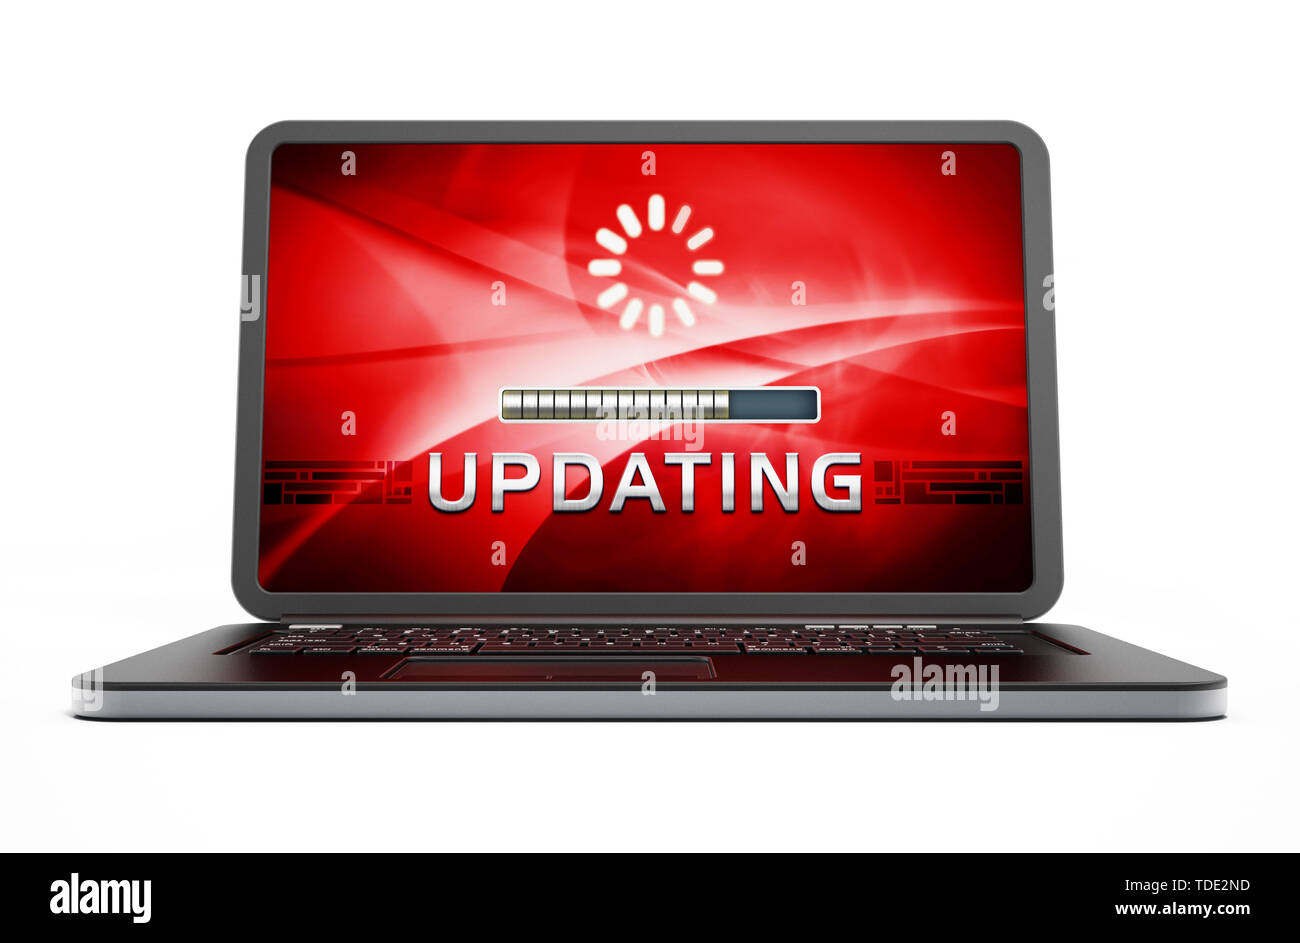 Laptop computer with software update screen. 3D illustration. Stock Photo